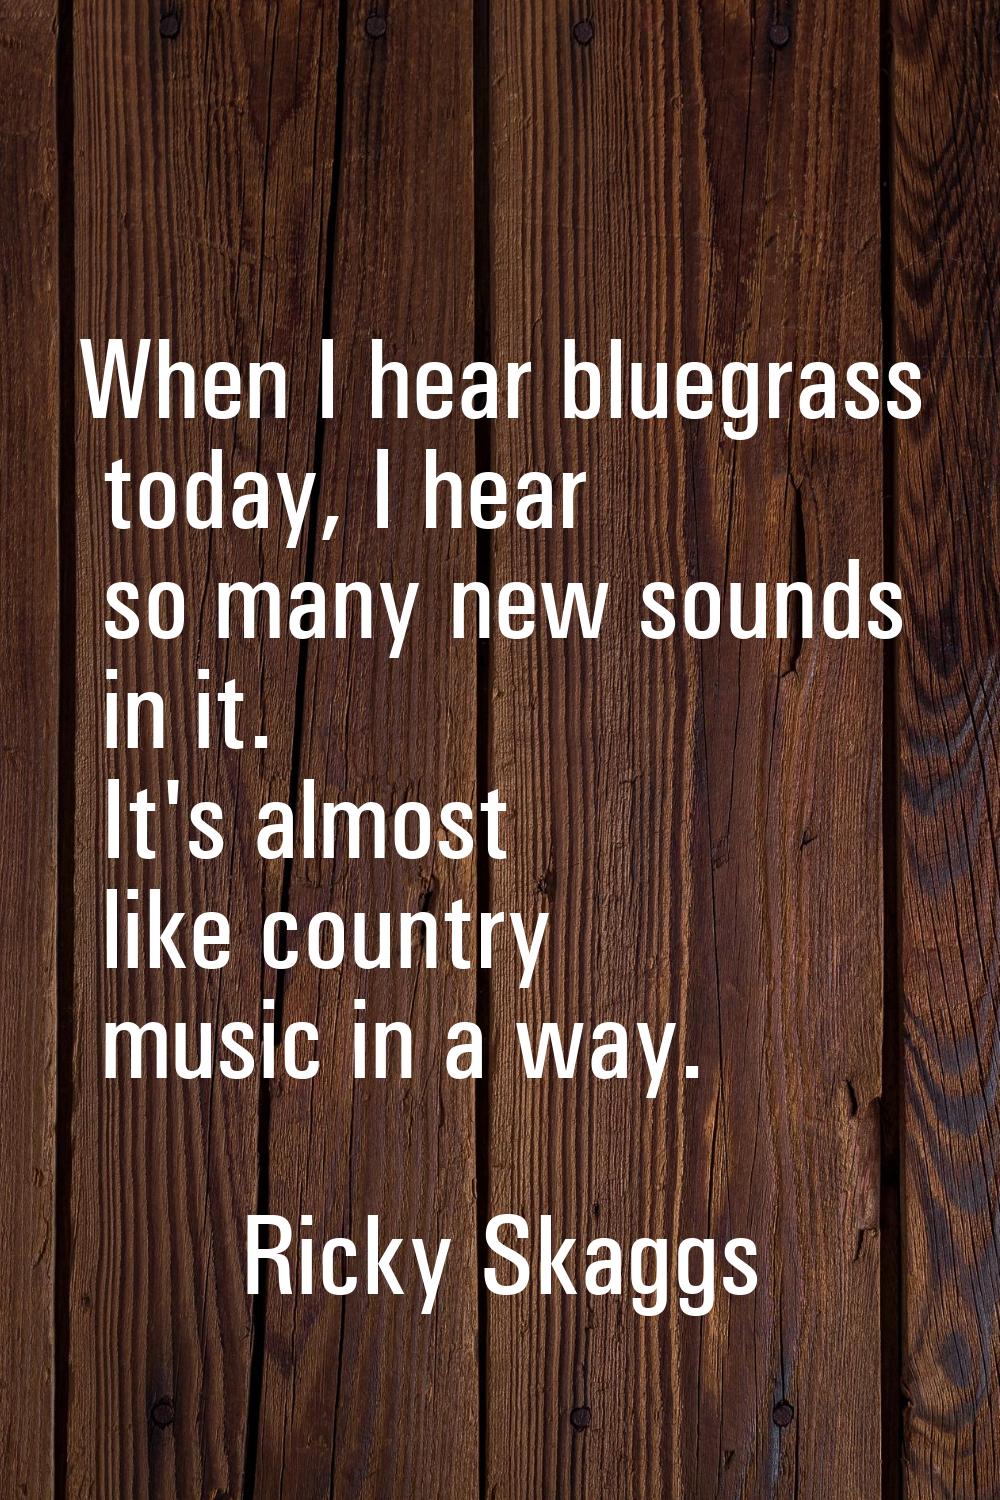 When I hear bluegrass today, I hear so many new sounds in it. It's almost like country music in a w